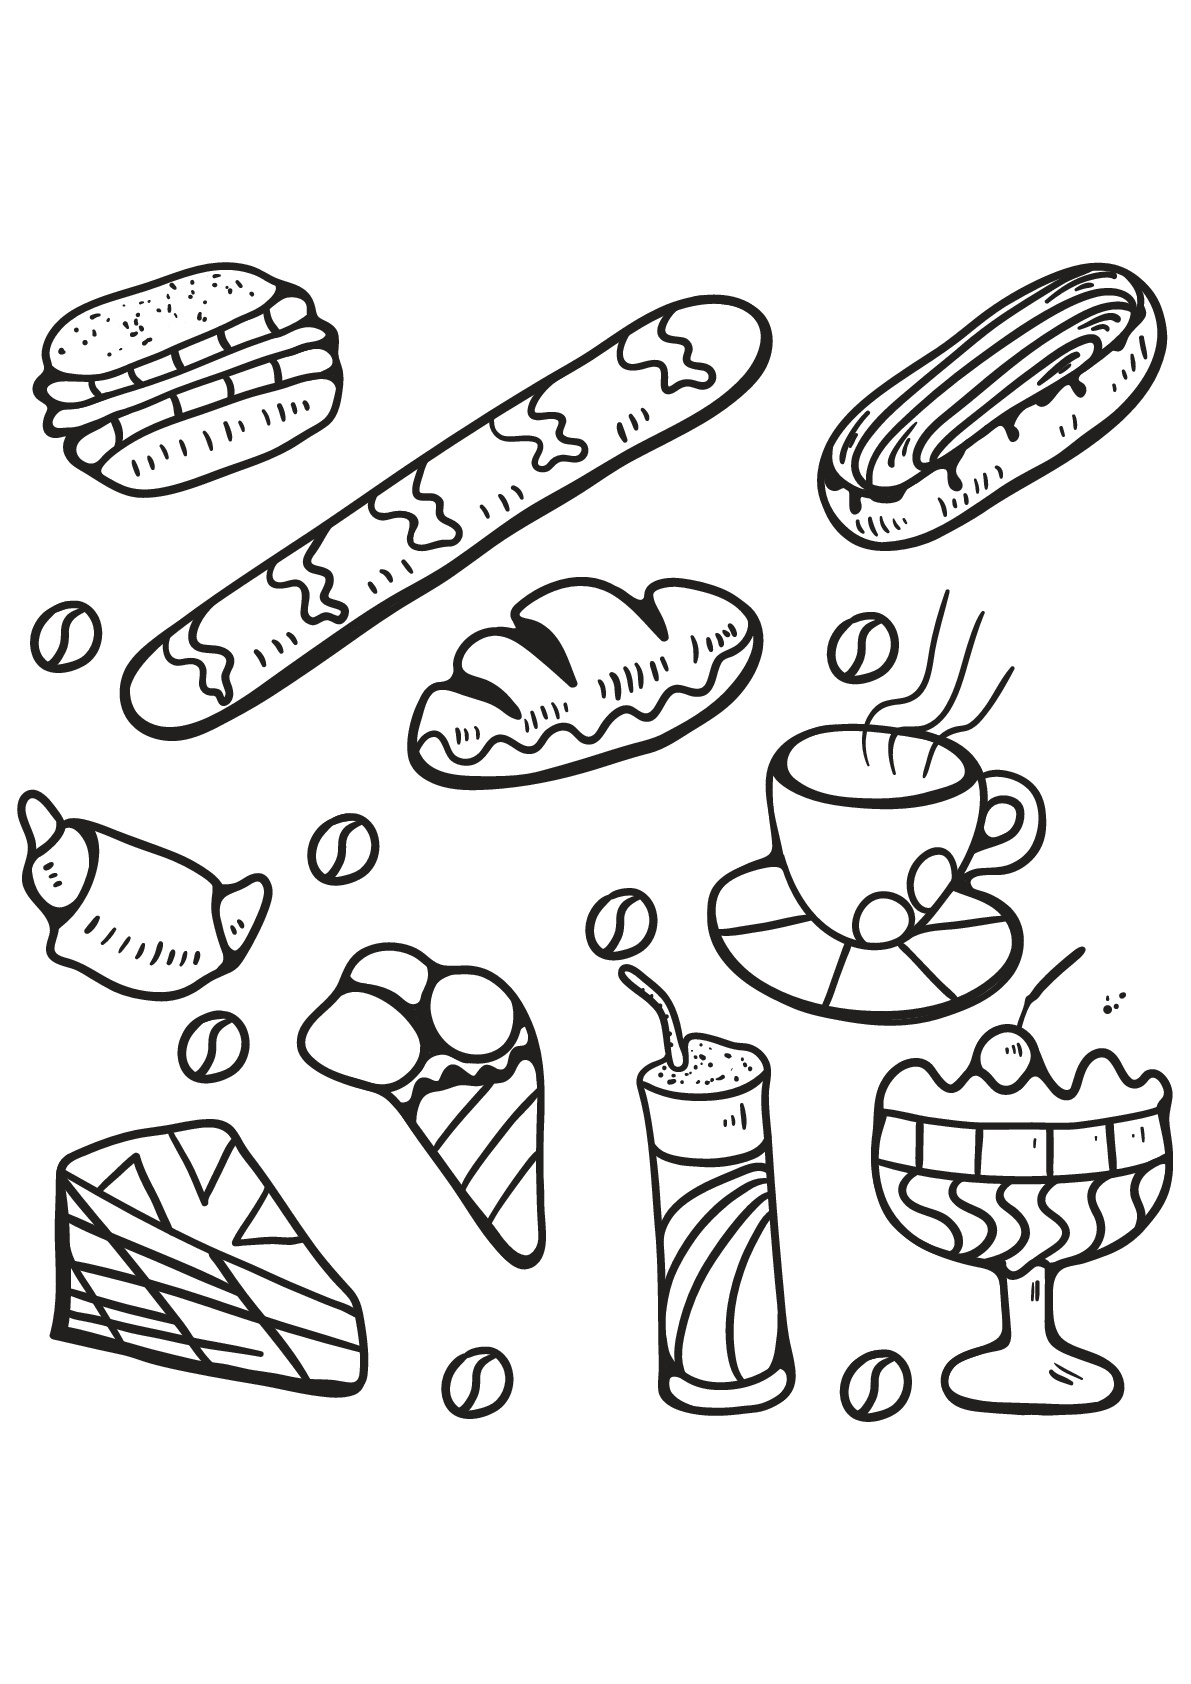 Download Food - Coloring Pages for Adults